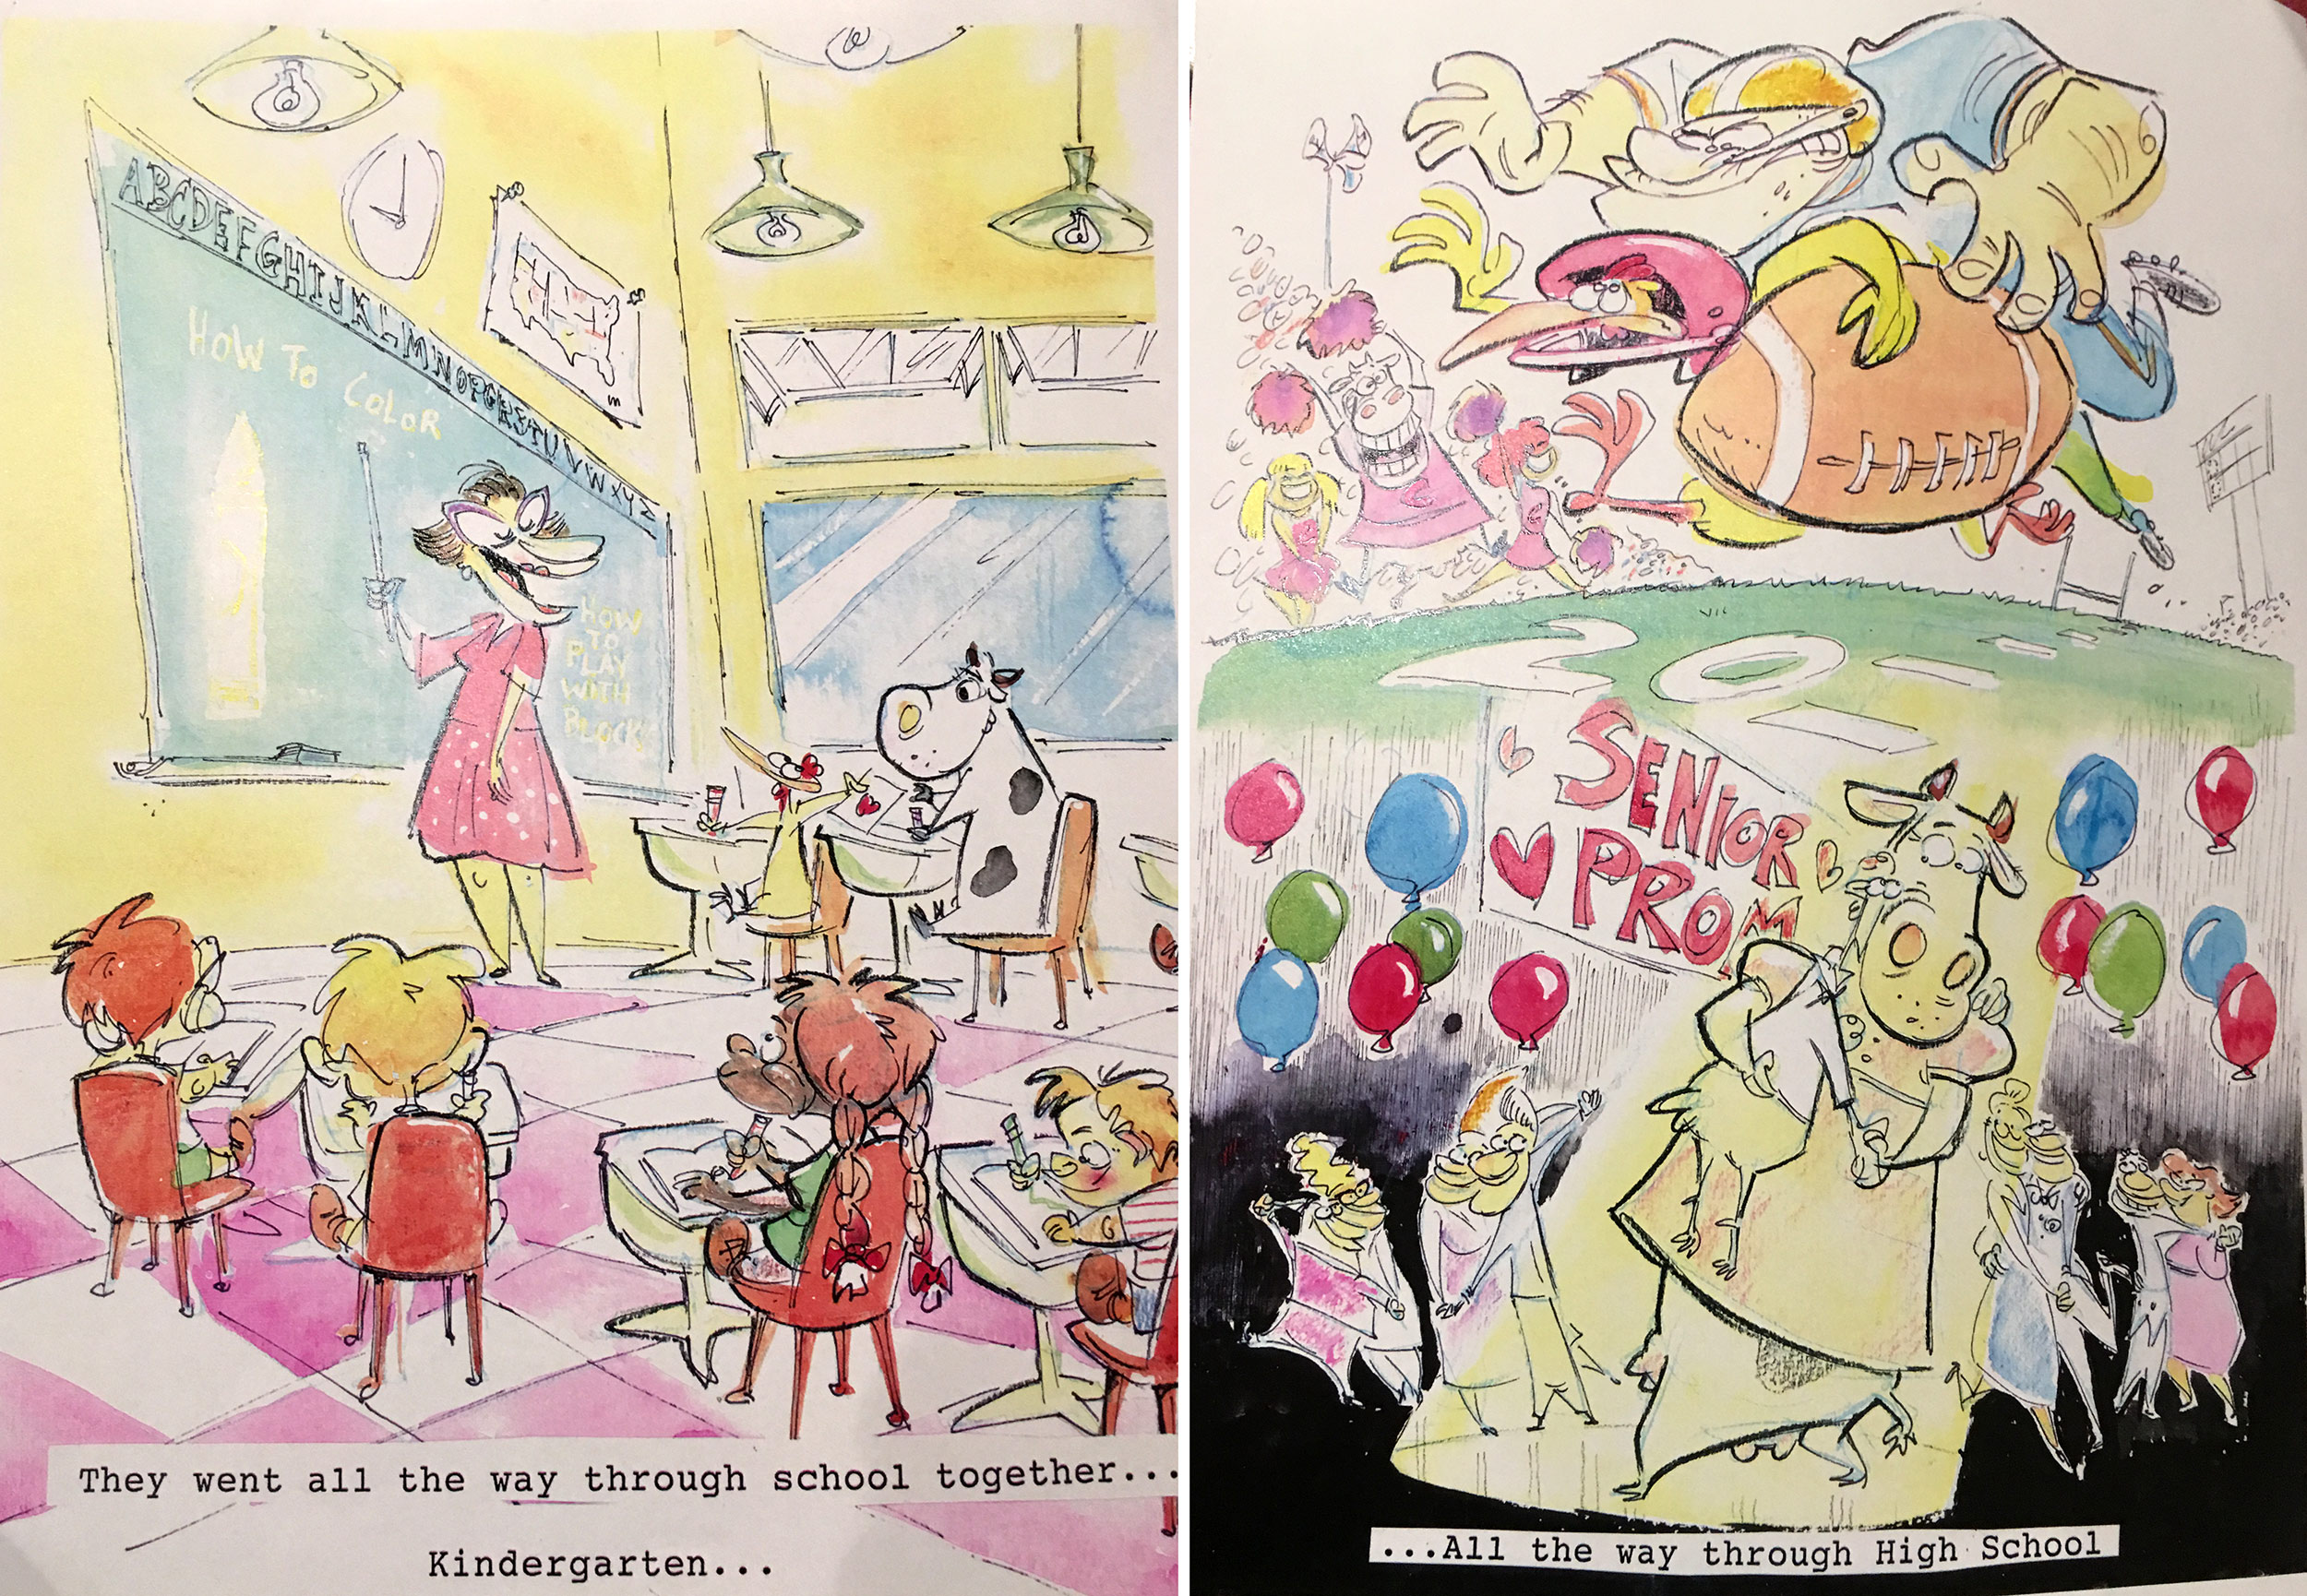 Pages from the emCow and Chicken/em storybook that Feiss used to pitch the series.